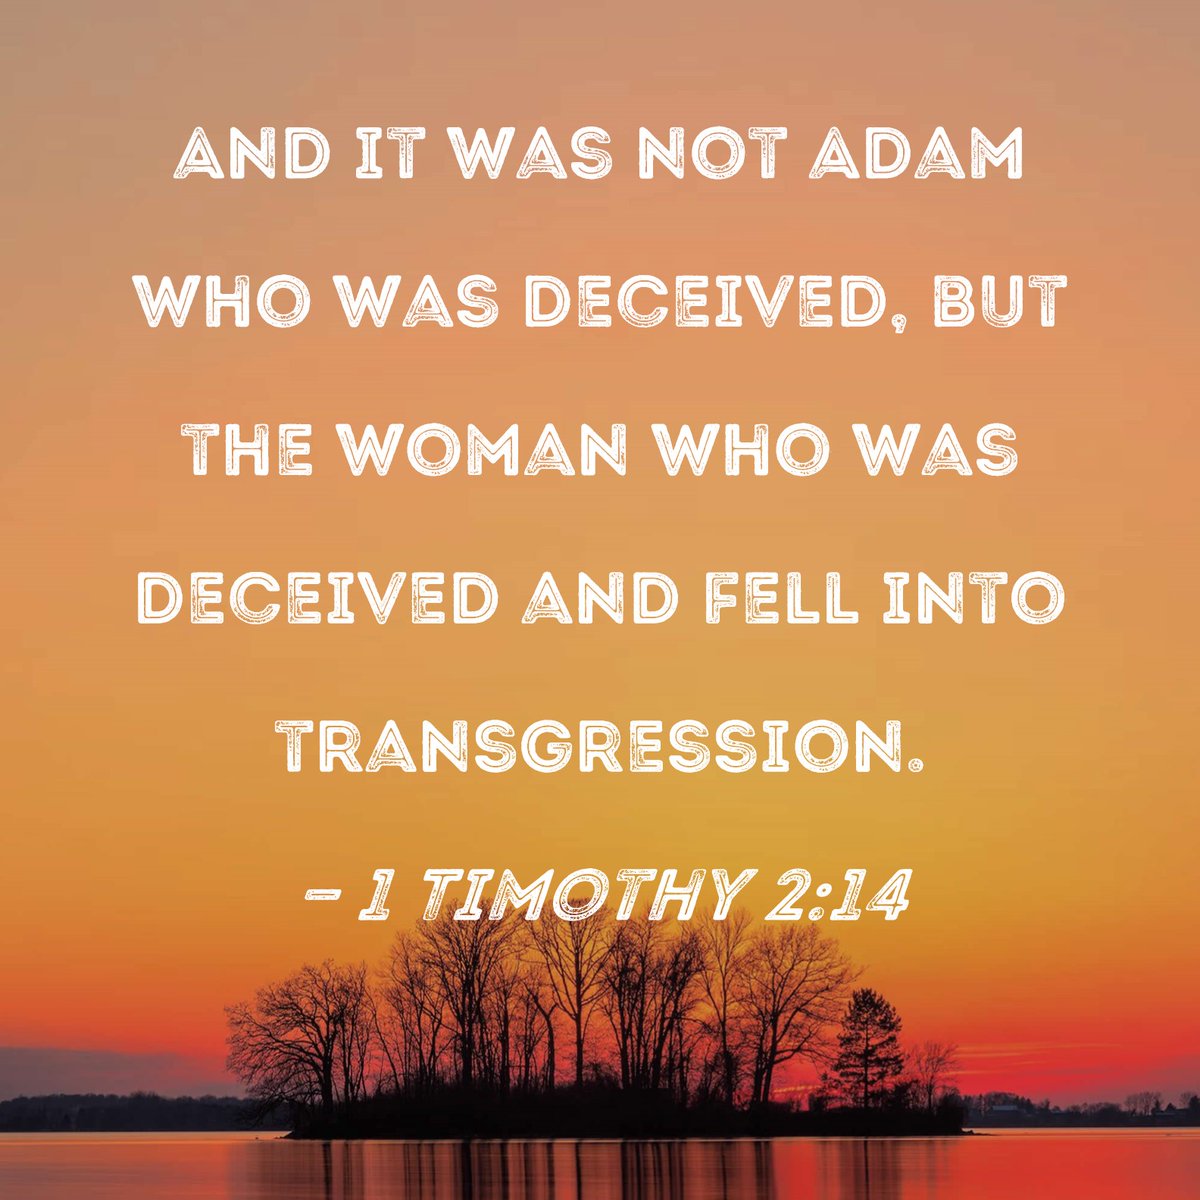 Okay so the woman was deceived and fell first, but Adam knew what he was doing. I think he loved his wife Eve so much, that he couldn't bear the thought of spending eternity without her.